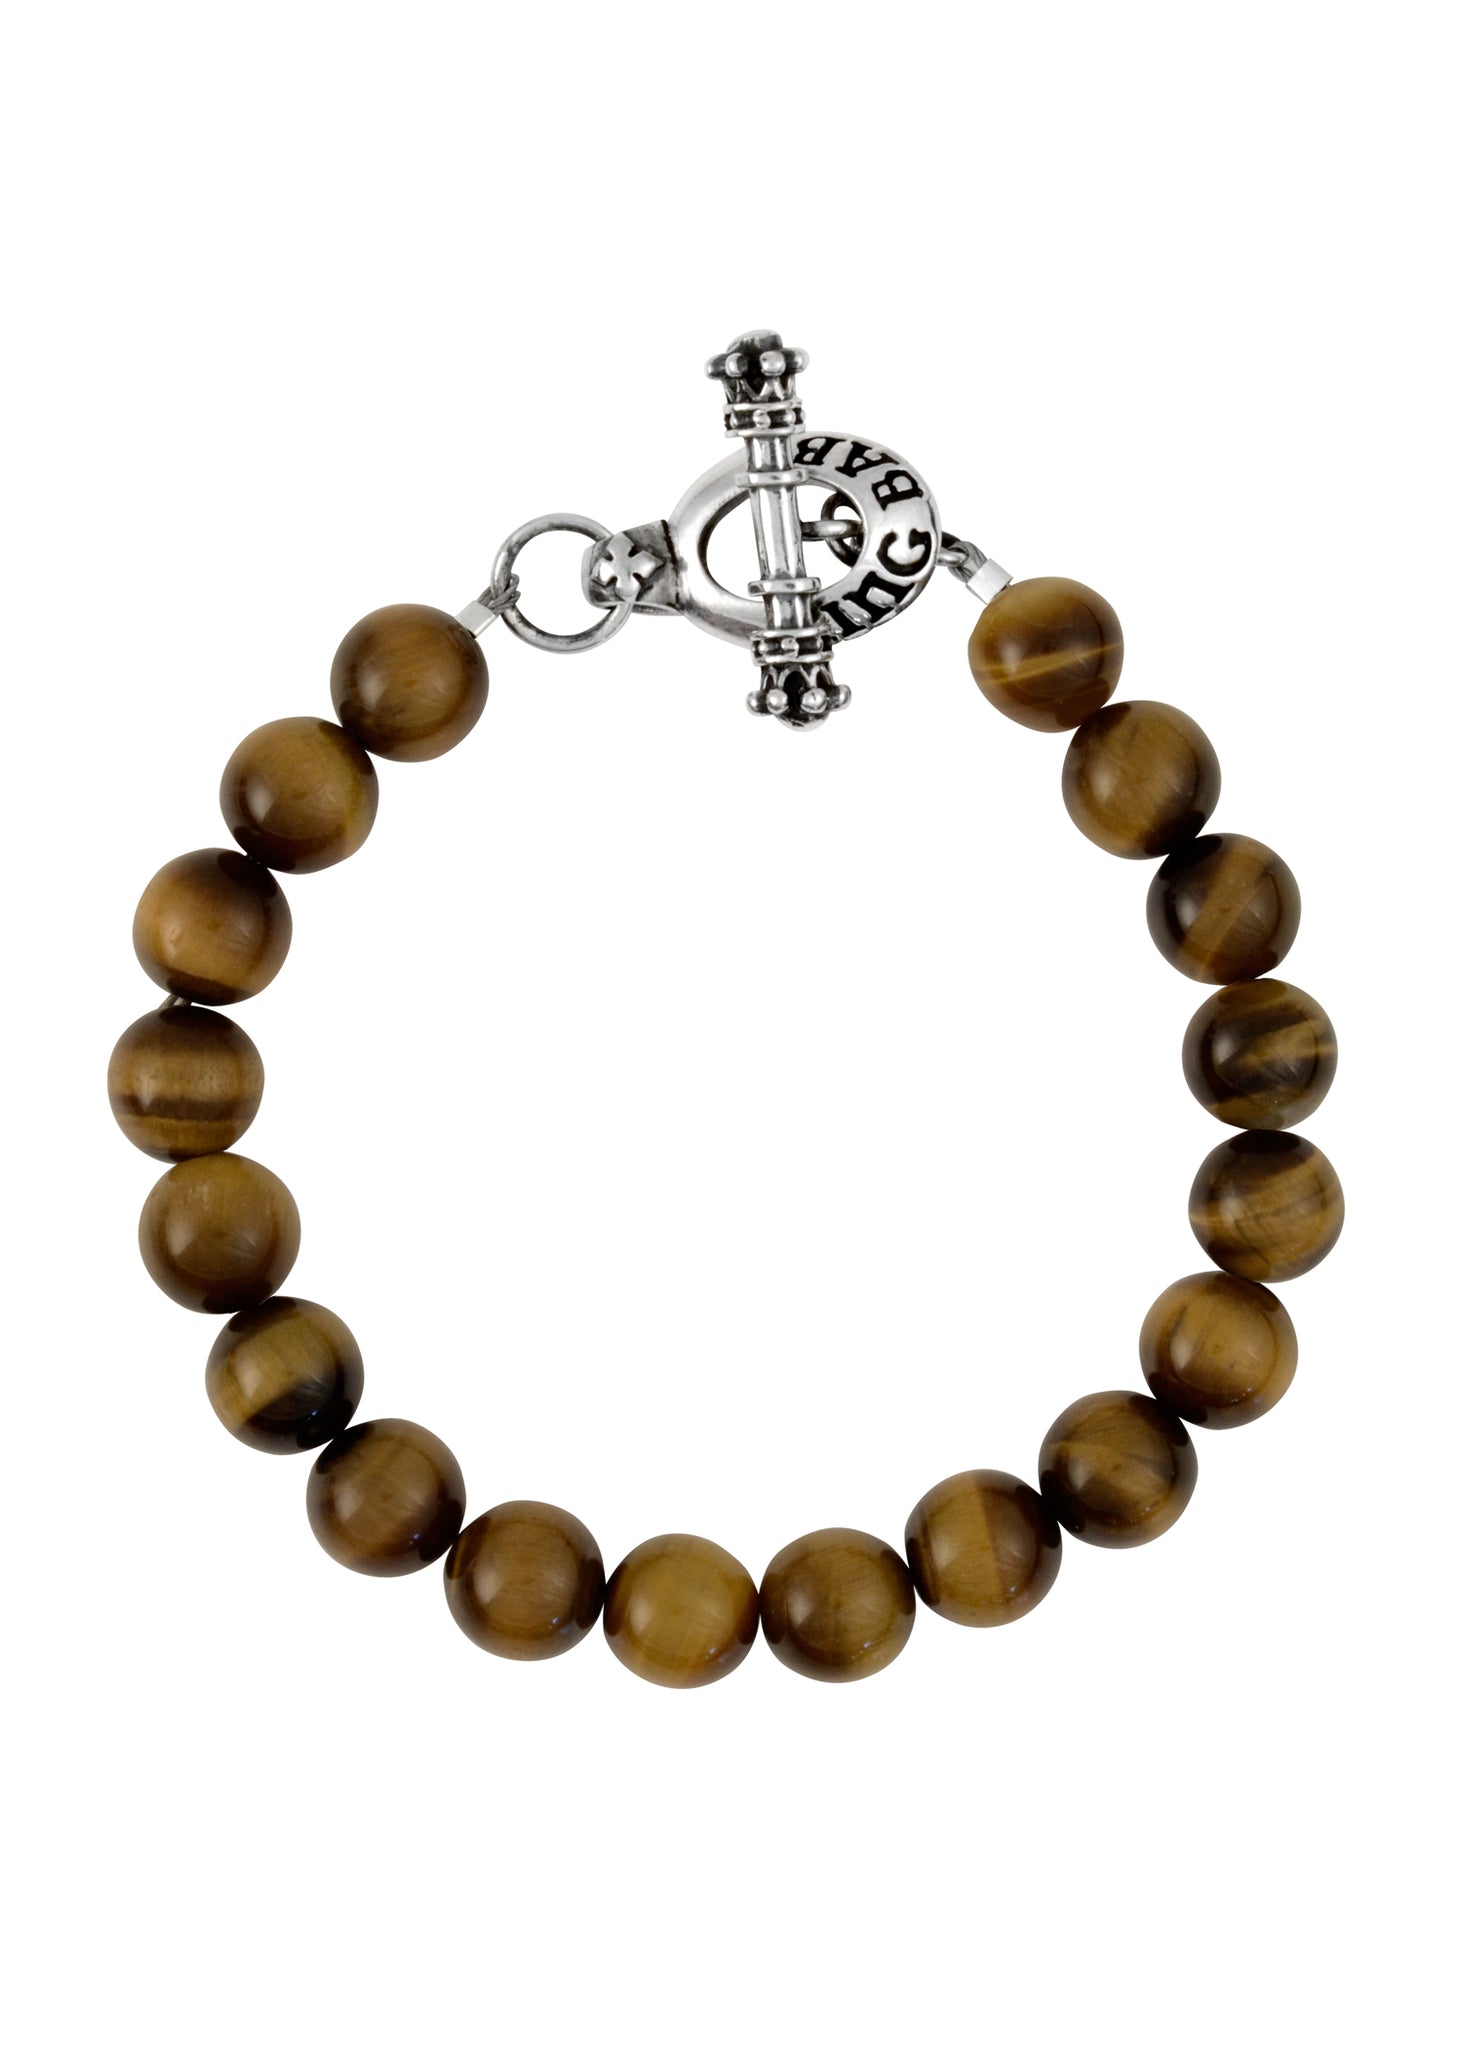 10mm Brown Tiger Eye Bead Bracelet w/Silver Toggle Clasp